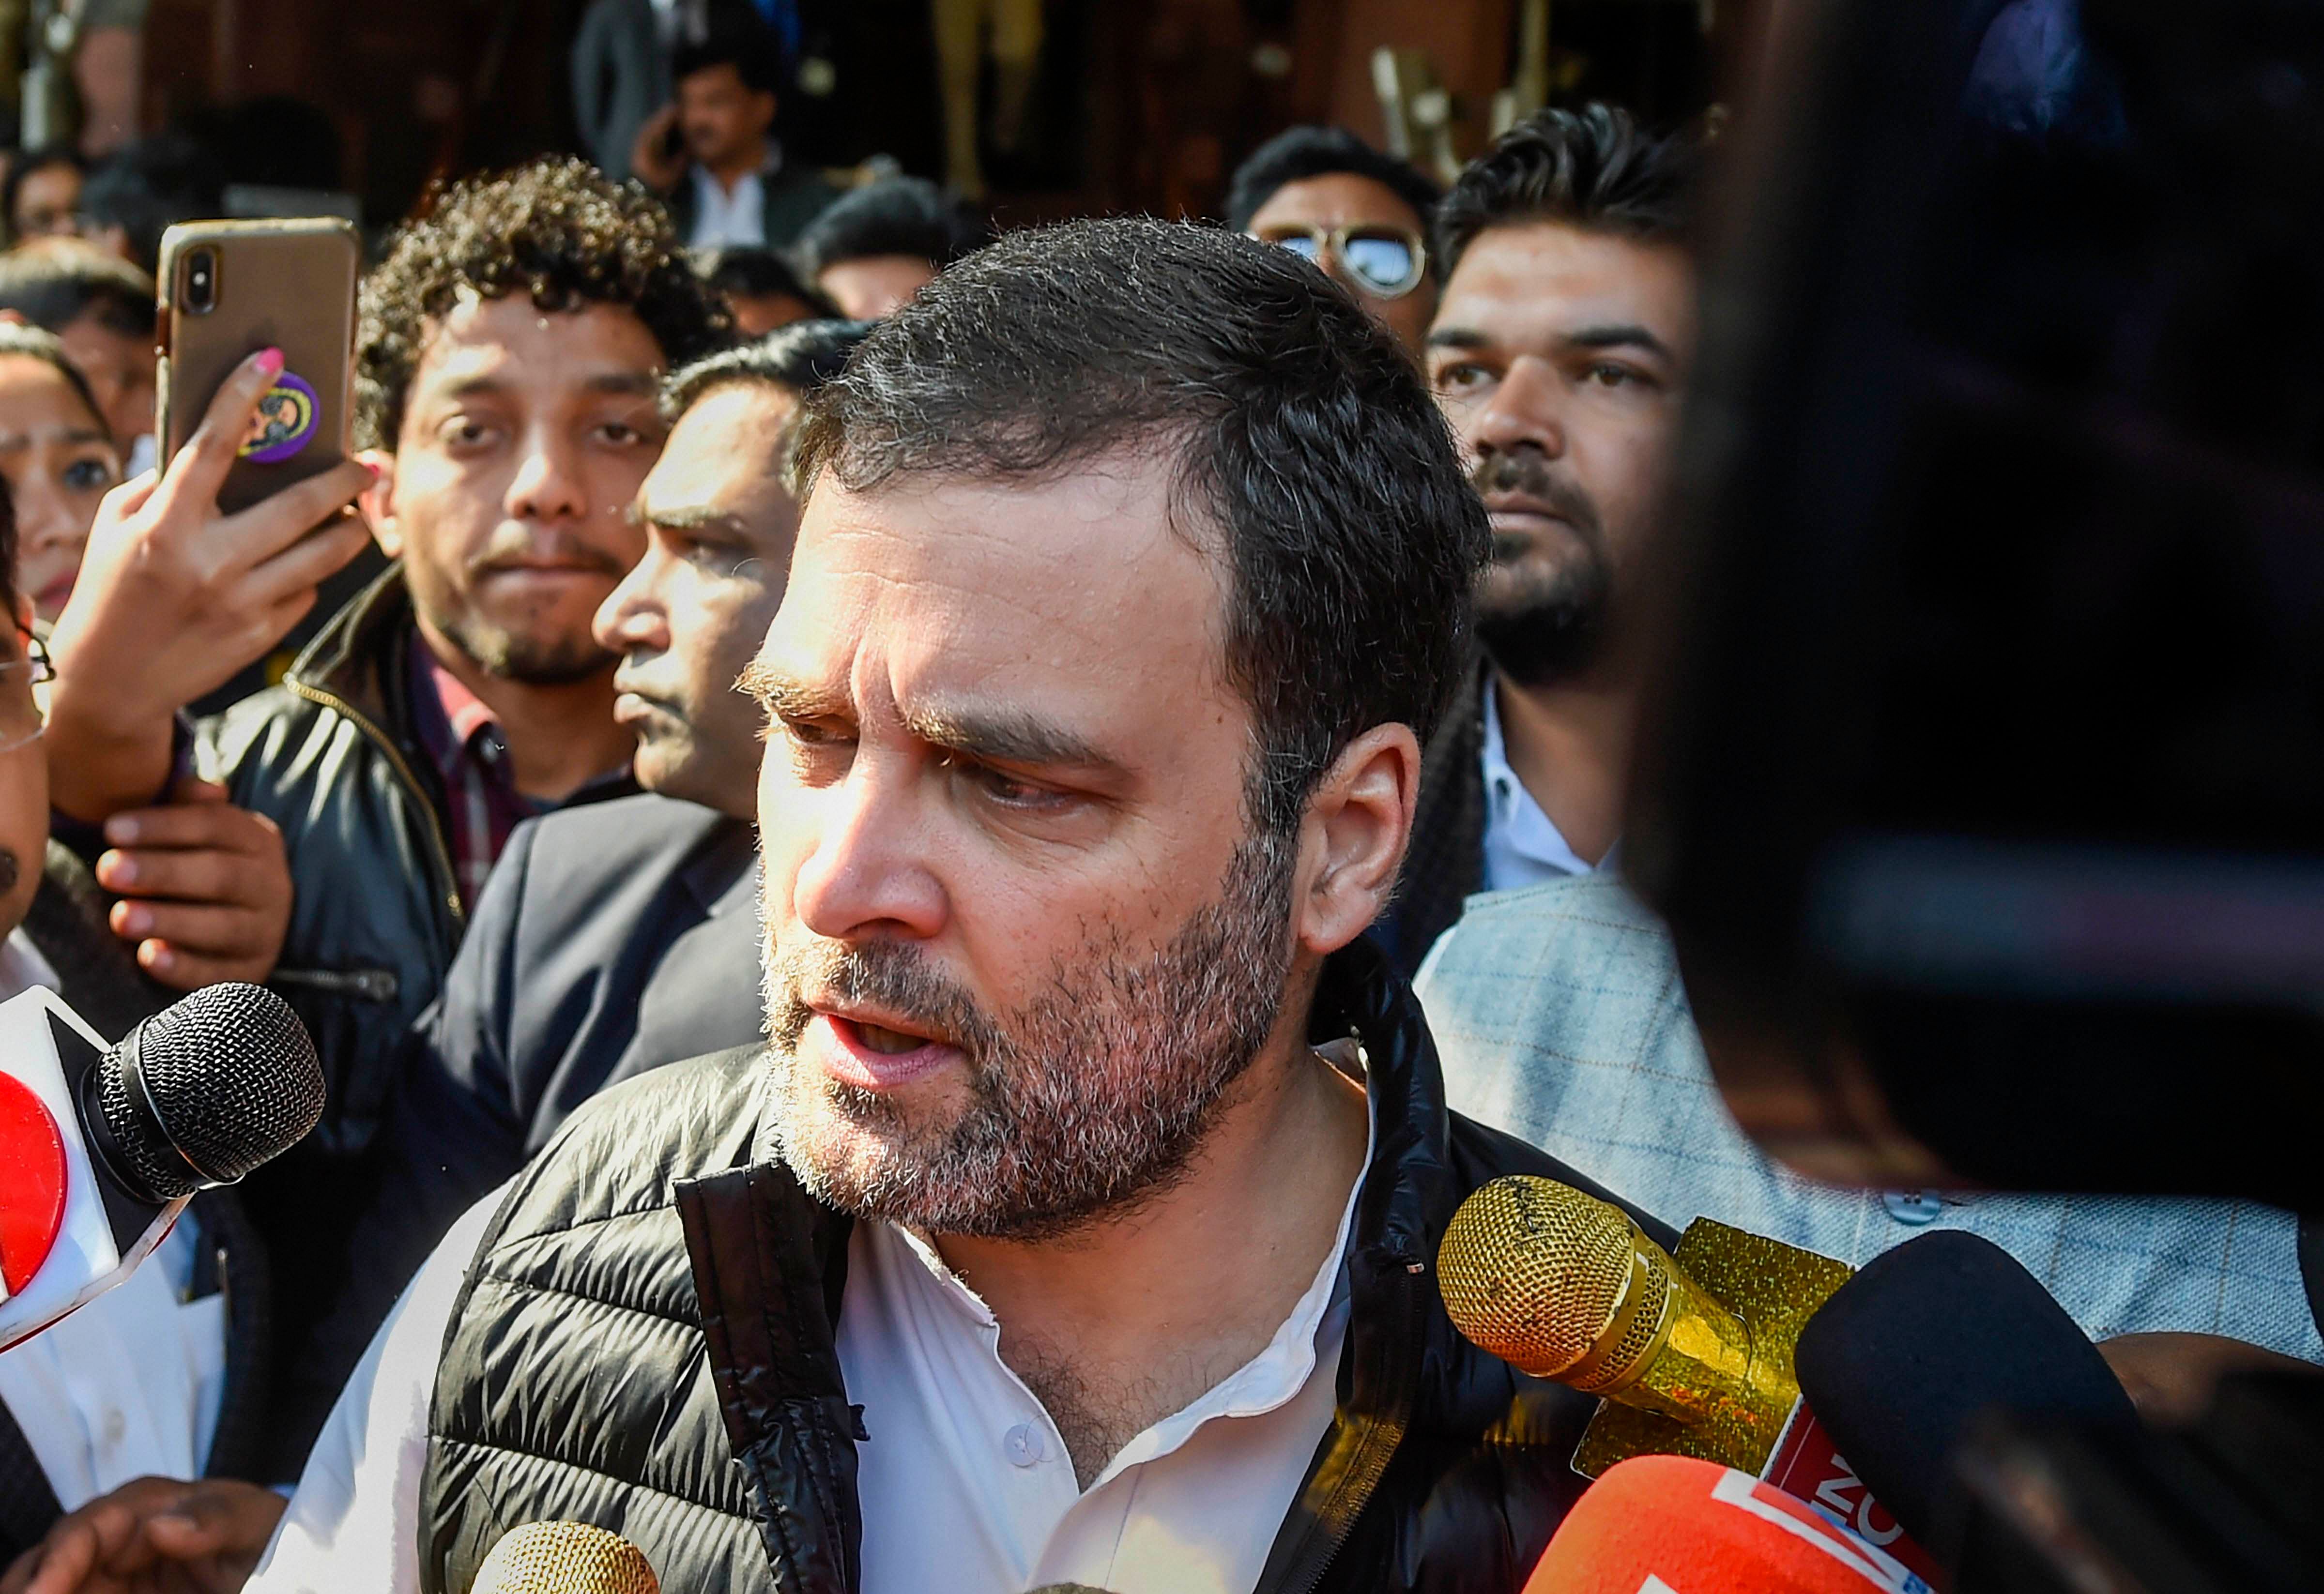 Congress leader Rahul Gandhi speaks to the media persons as he leaves the Parliament House during the ongoing Budget Session, in New Delhi. (PTI Photo)